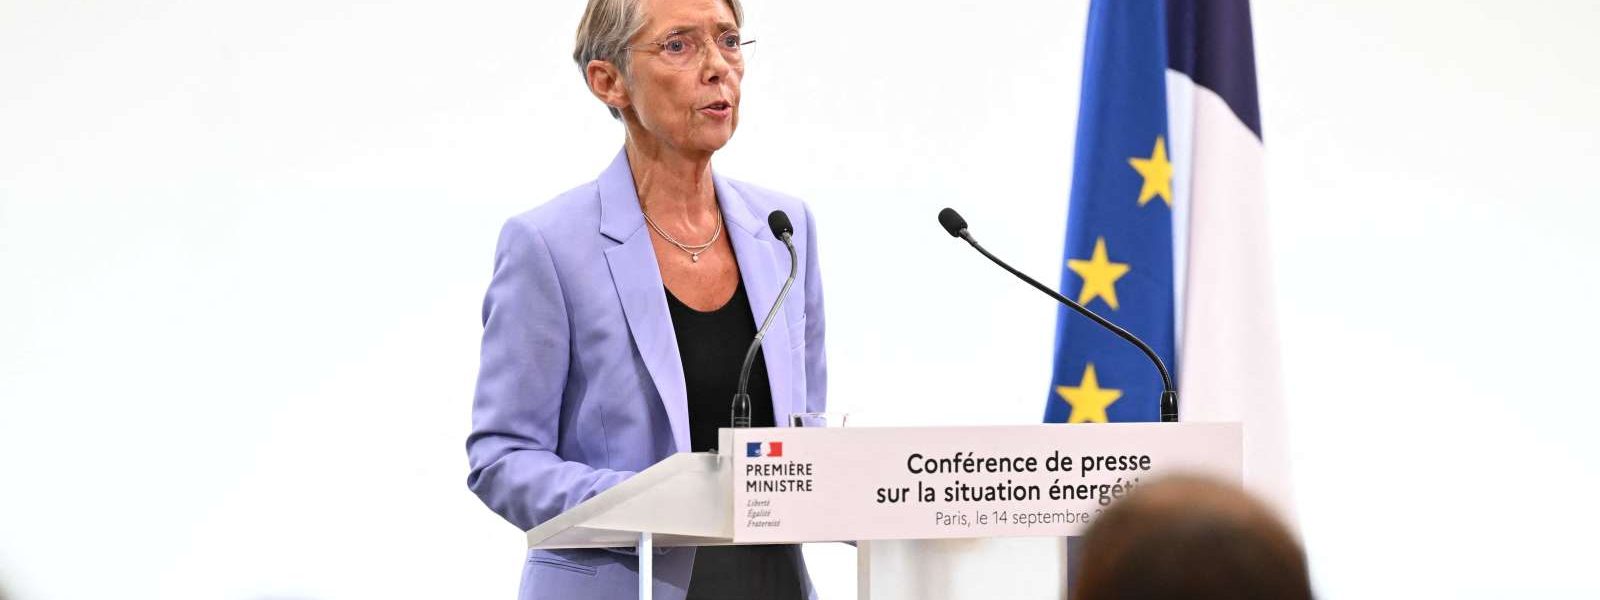 French Prime Minister Elisabeth Borne delivers a speech during a press conference on the energy situation in France and Europe in Paris, on September 14, 2022. (Photo by Bertrand GUAY / various sources / AFP)